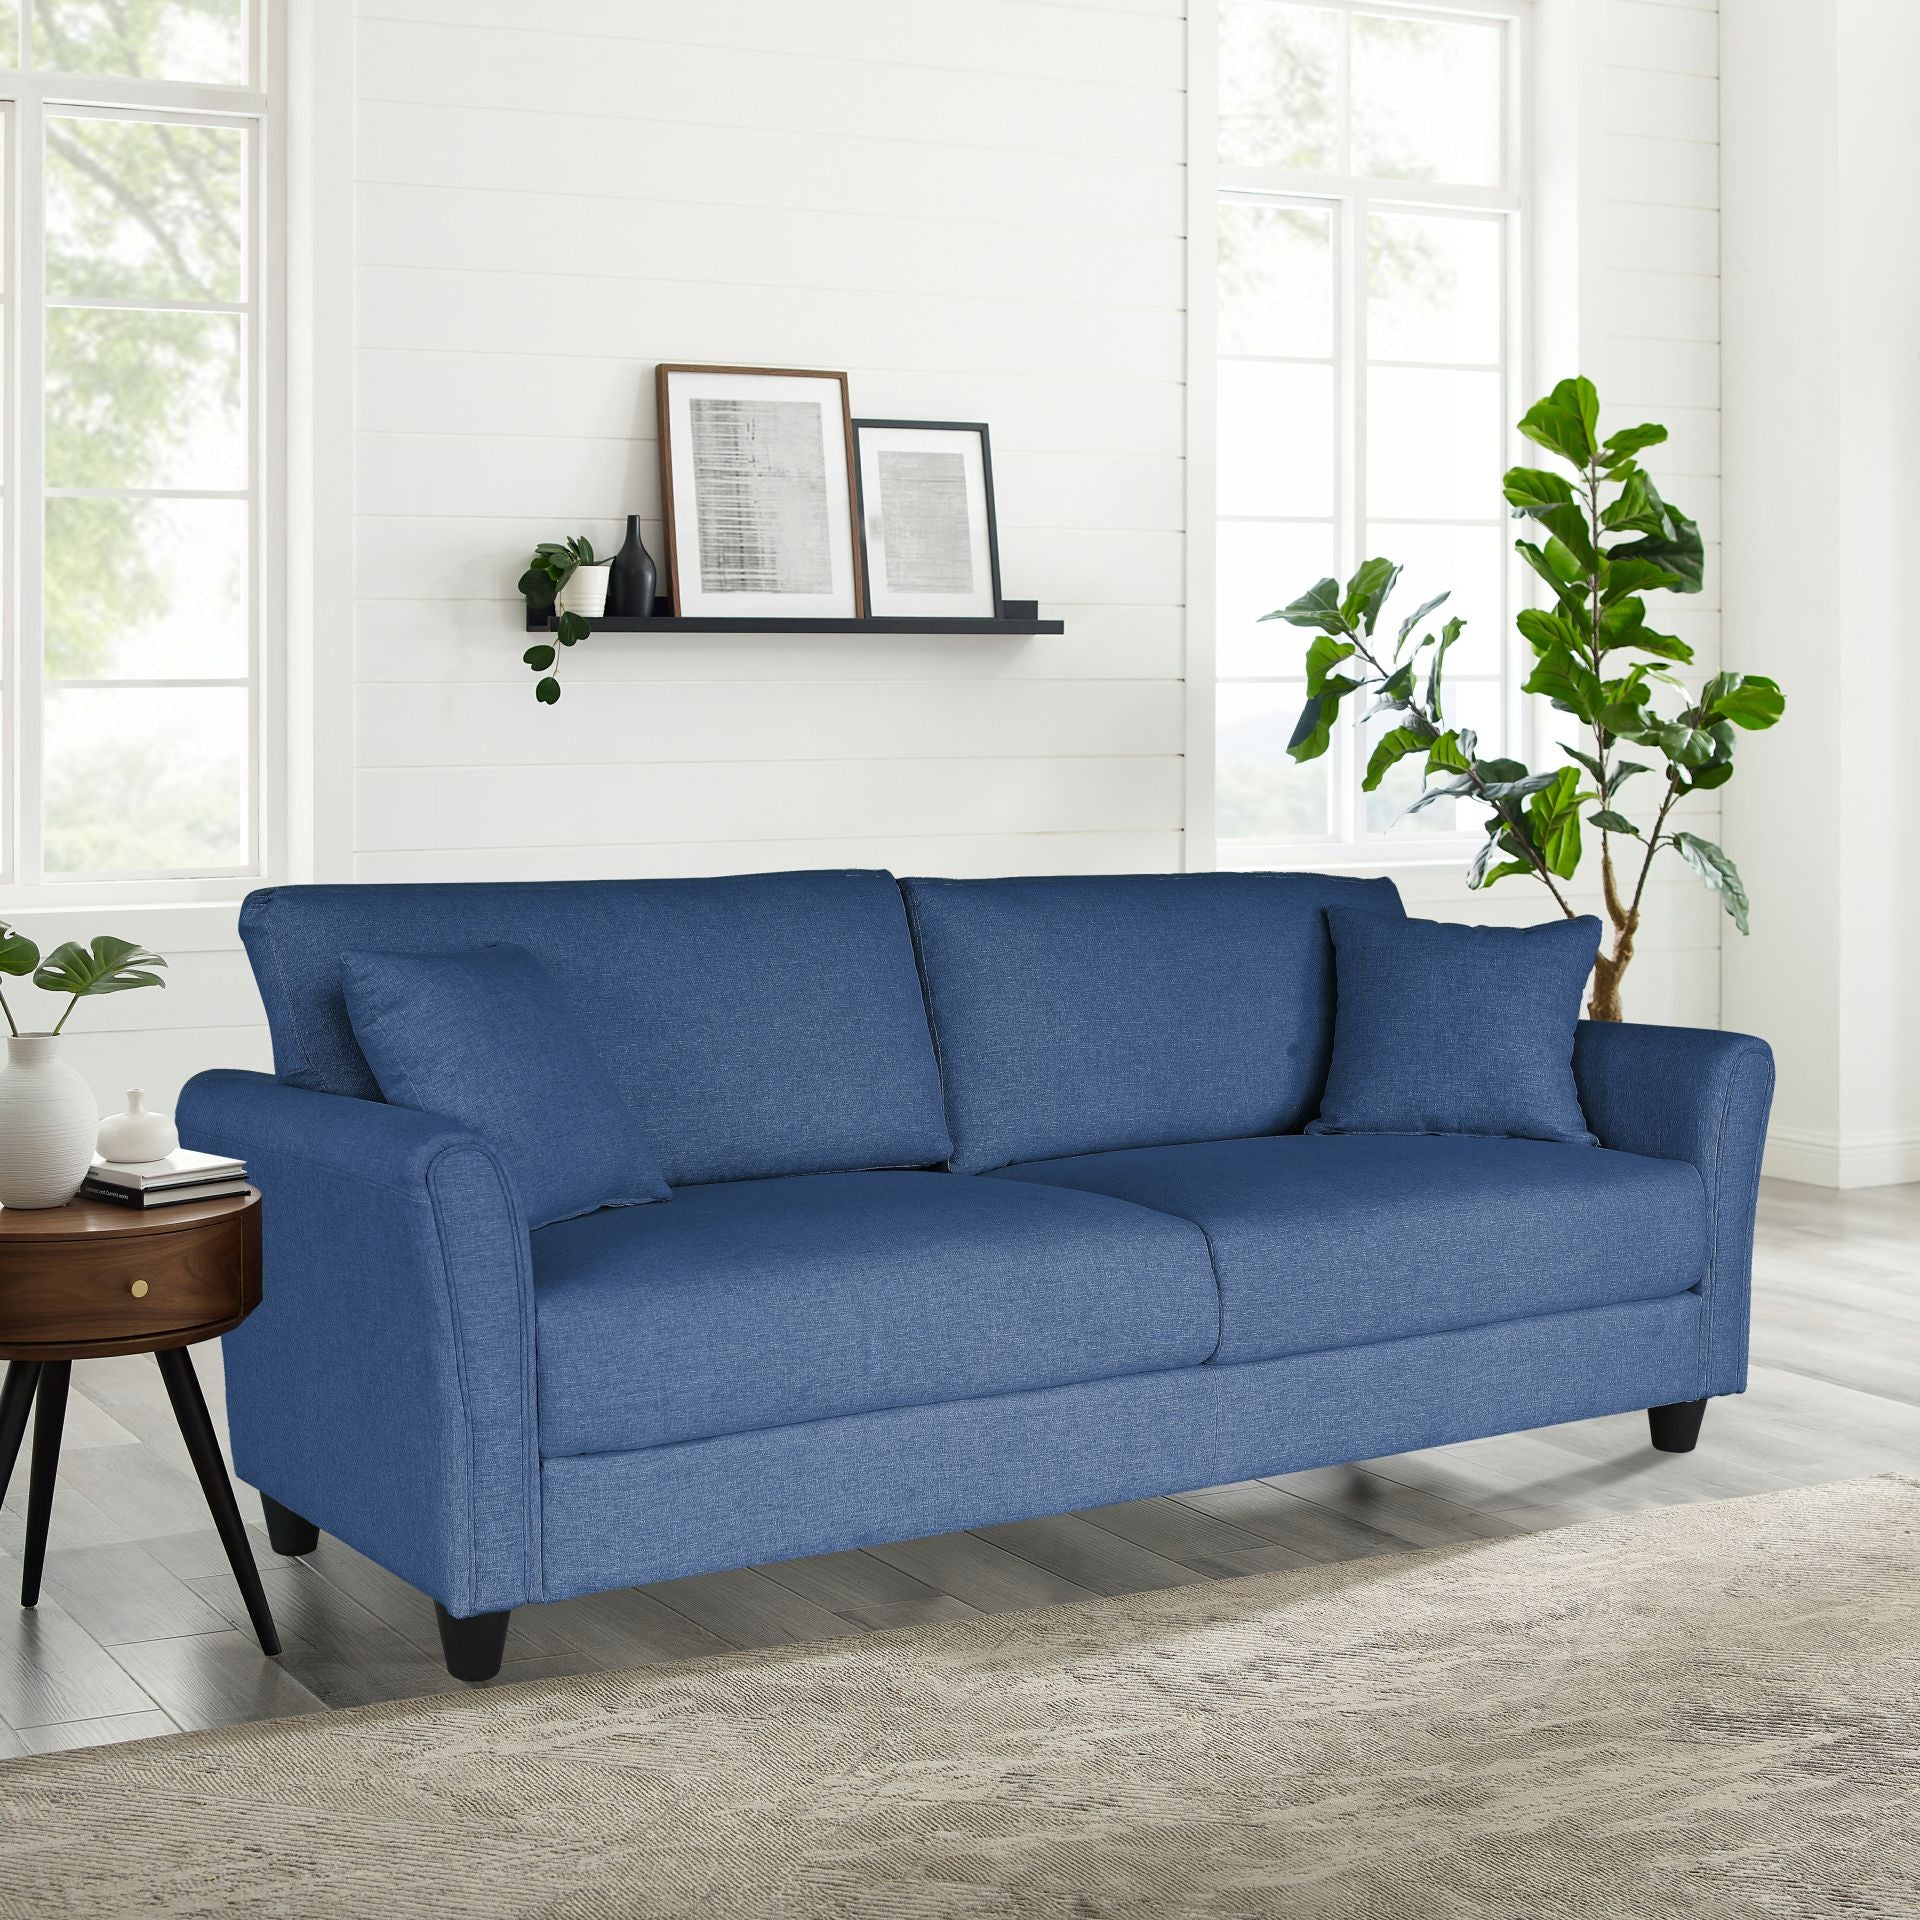 ZNTS Blue Linen, Three-person Indoor Sofa, Two Throw Pillows, Solid Wood Frame, Plastic Feet 06584591